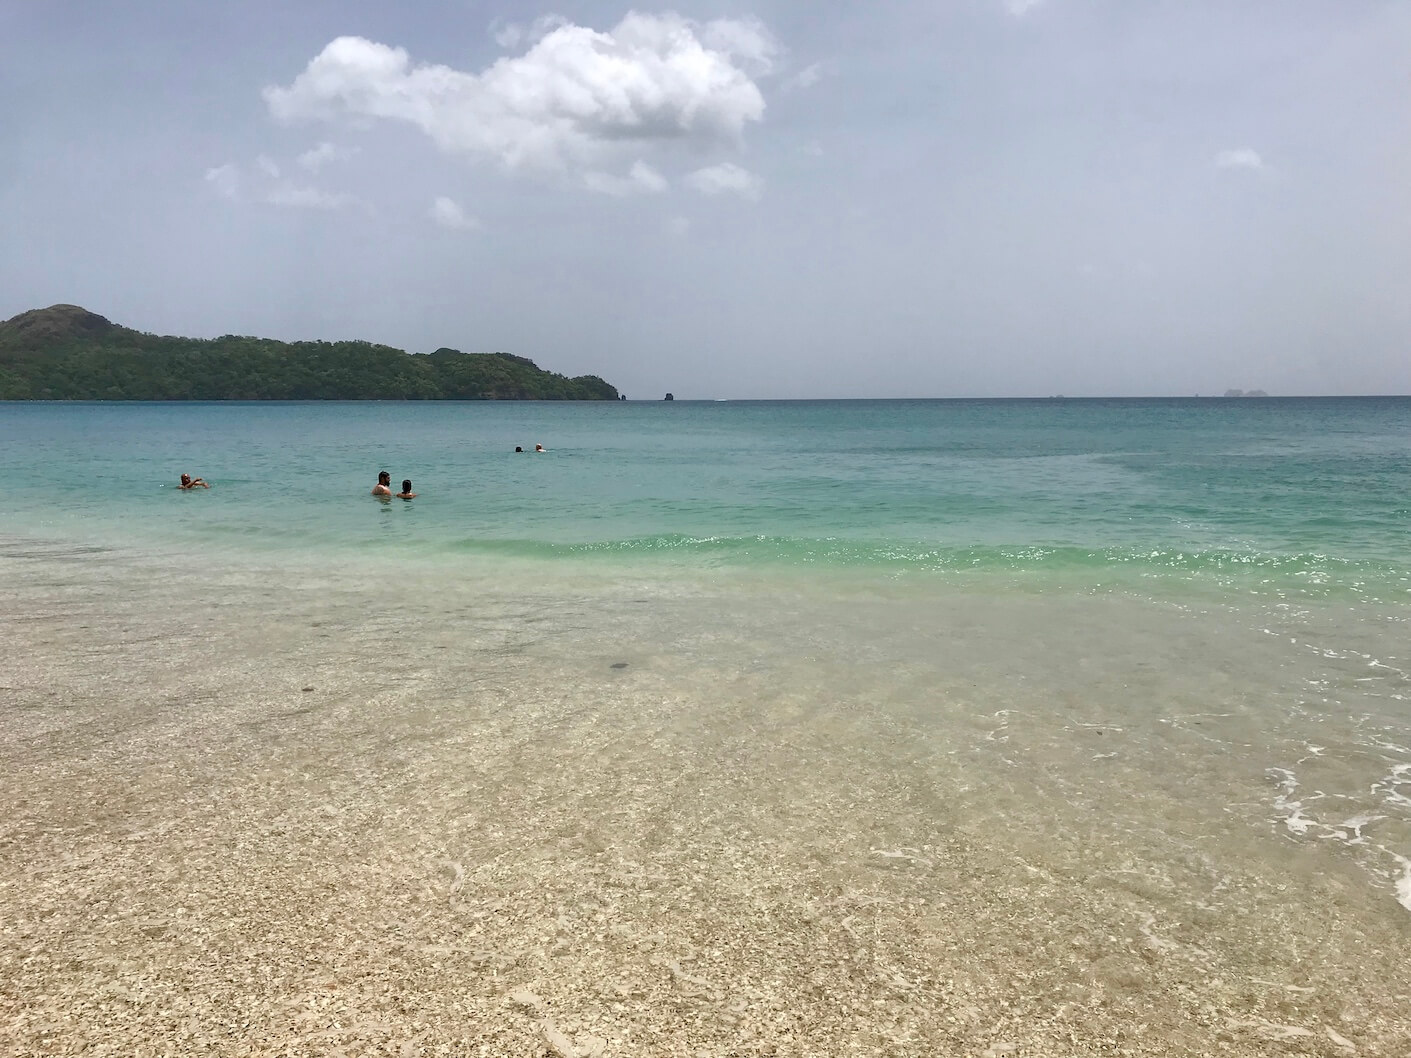 Crystal clear waters at Playa Conchal